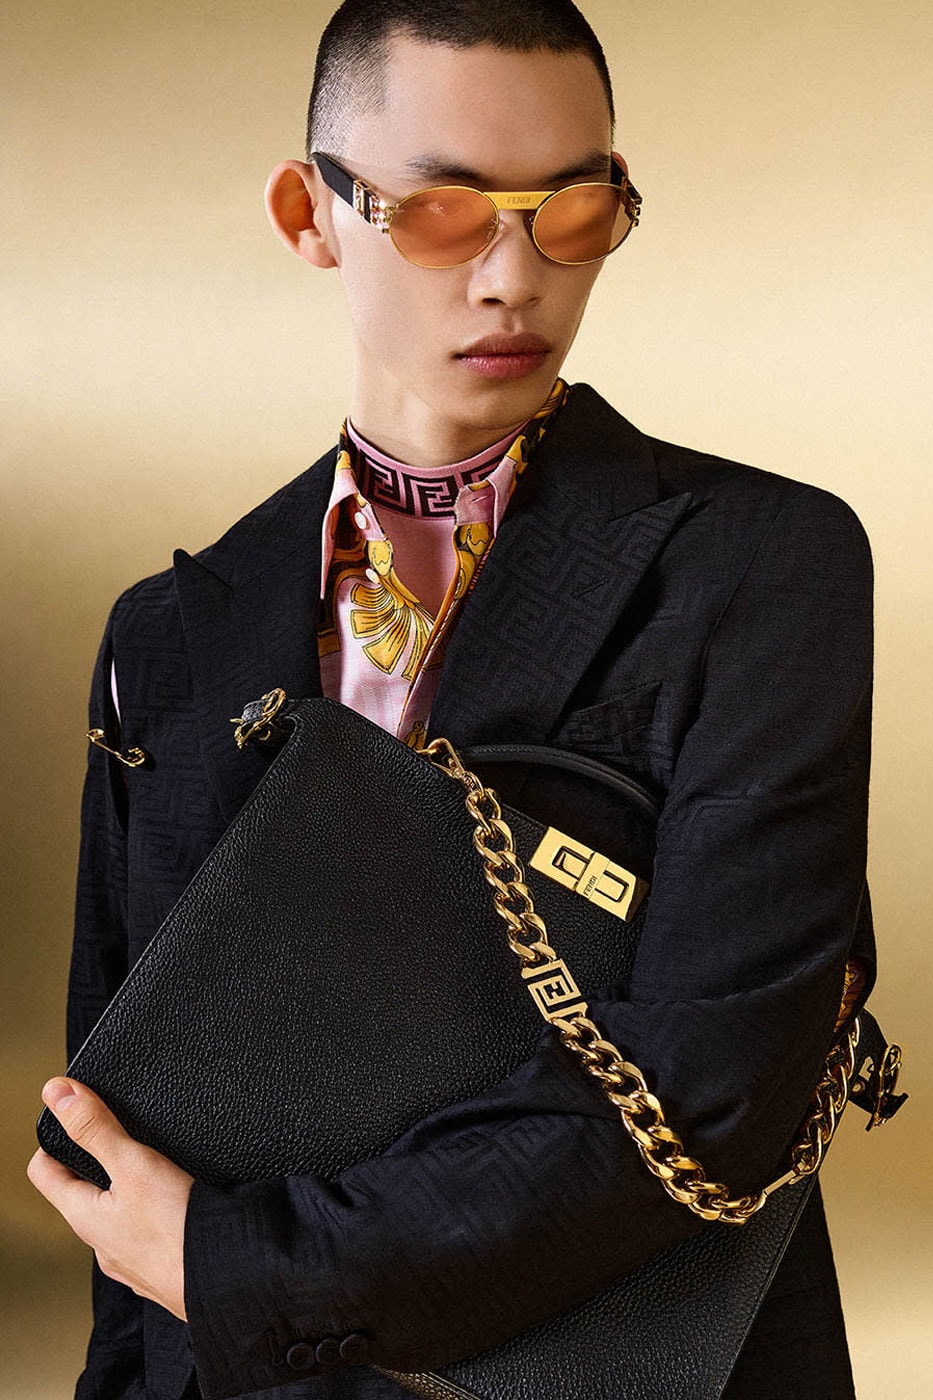 Fendace Is Here: Shop the Fendi x Versace Collection Now